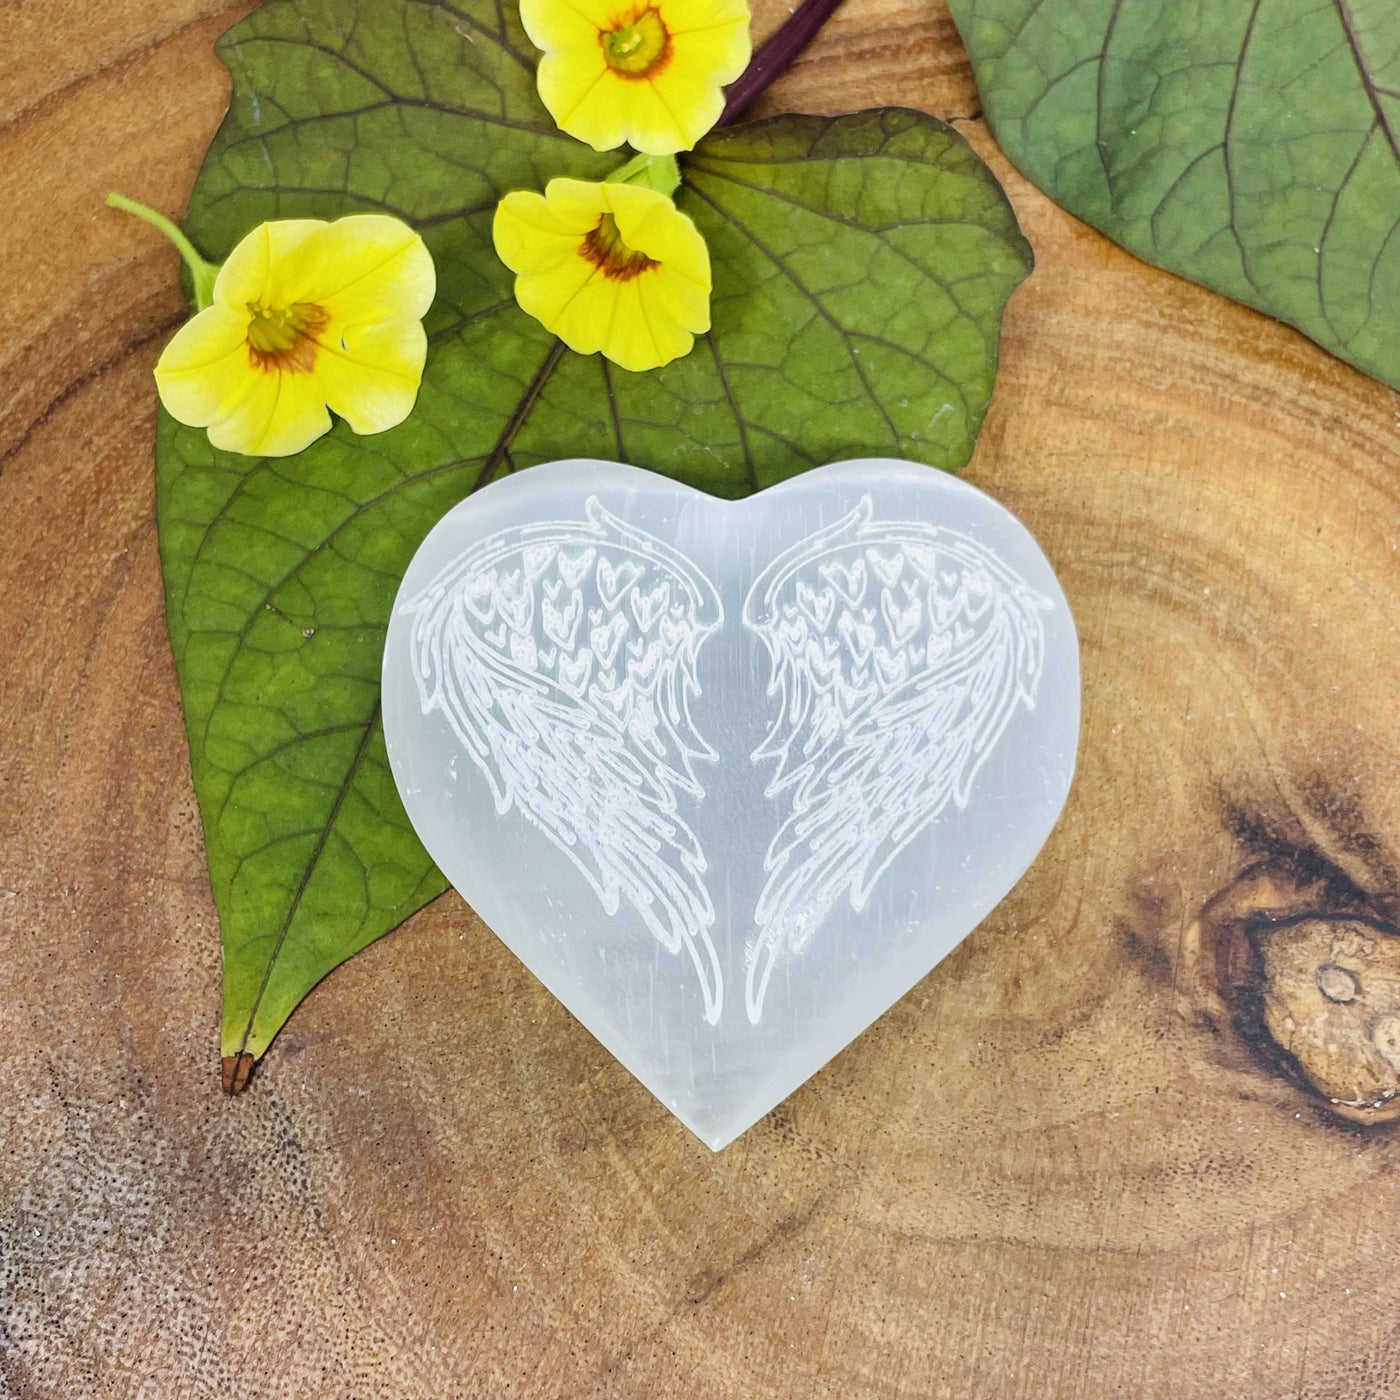 Selenite Stone Heart - Selenite Heart with Angel Wing Engraving on a wood plate